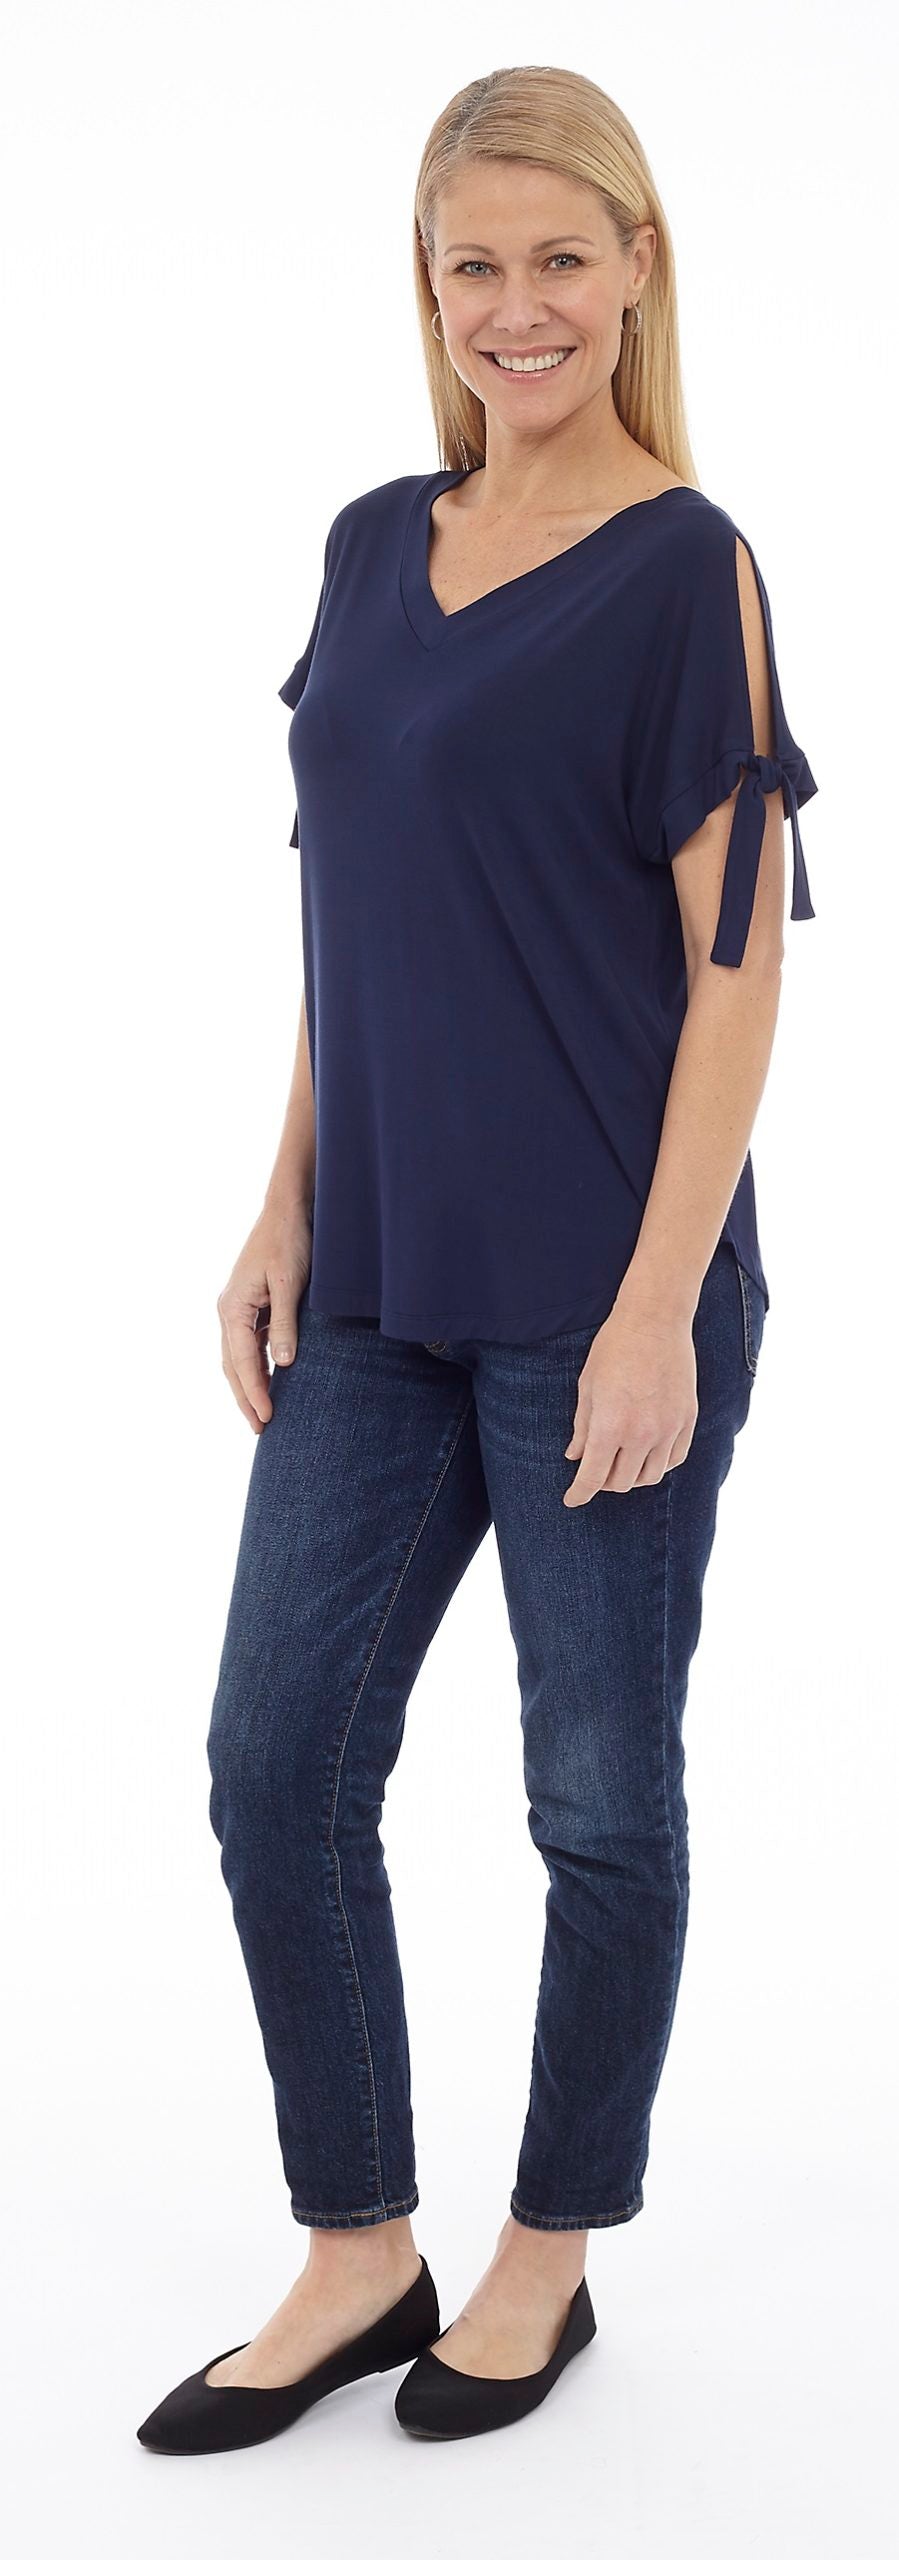 Short Sleeve Top with Tie Detail at Cuff Style BM-105 - MISS LESTER'S 